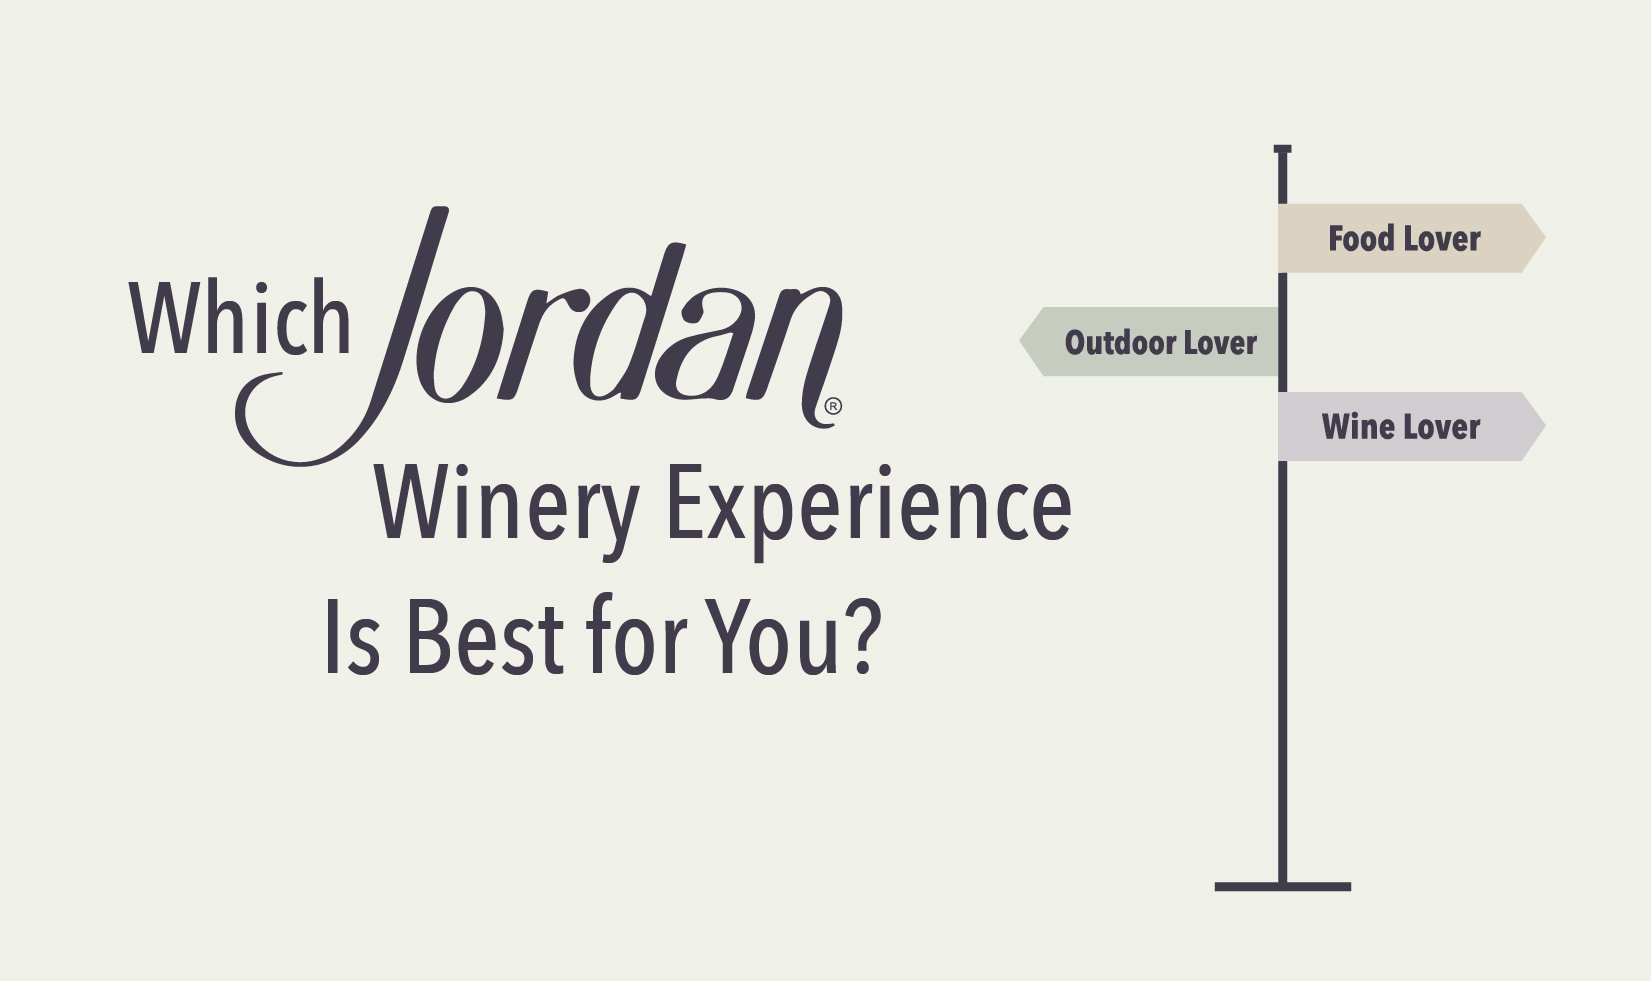 Which Jordan Winery Experience is Best for You Infographic with image text: "Which Jordan Winery Experience is best for you?"